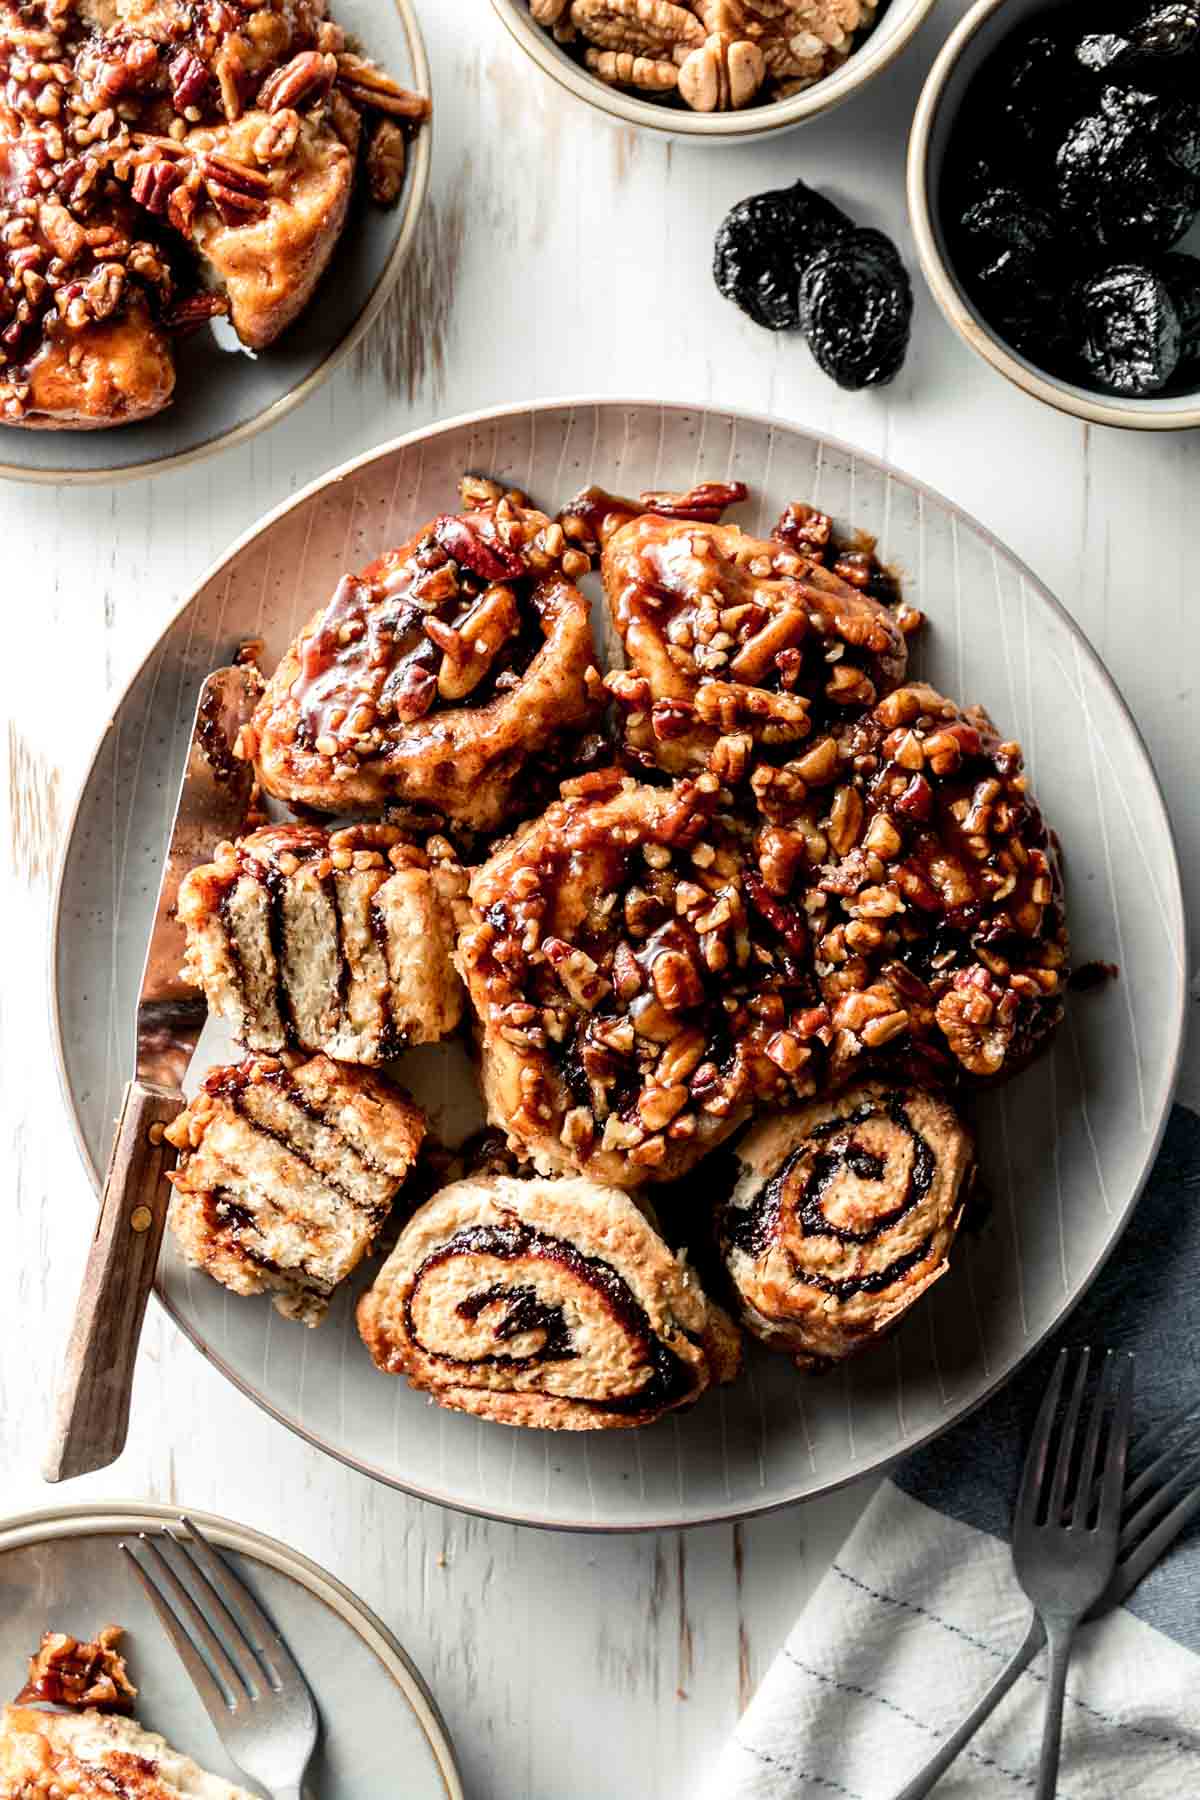 A plate full of gluten free sticky buns with gooey pecan caramel topping, some flipped over to show swirl of prune filling.